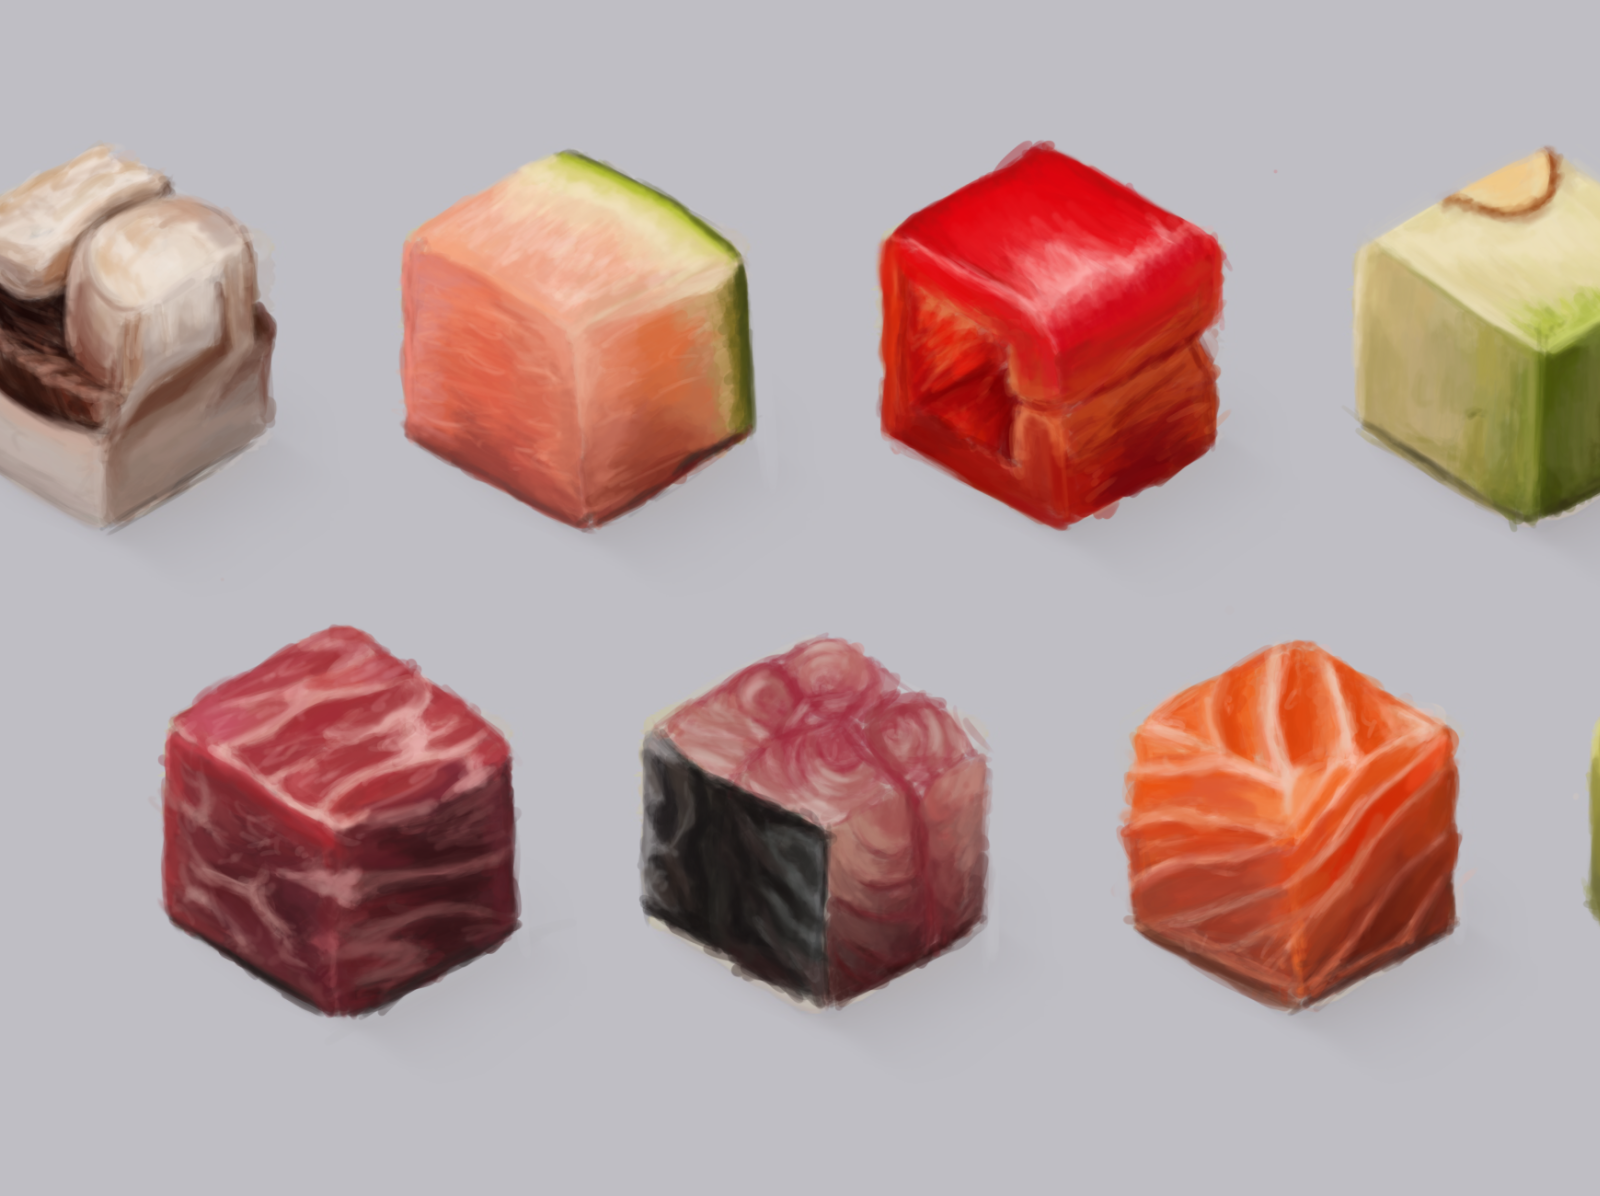 Jelly cubes